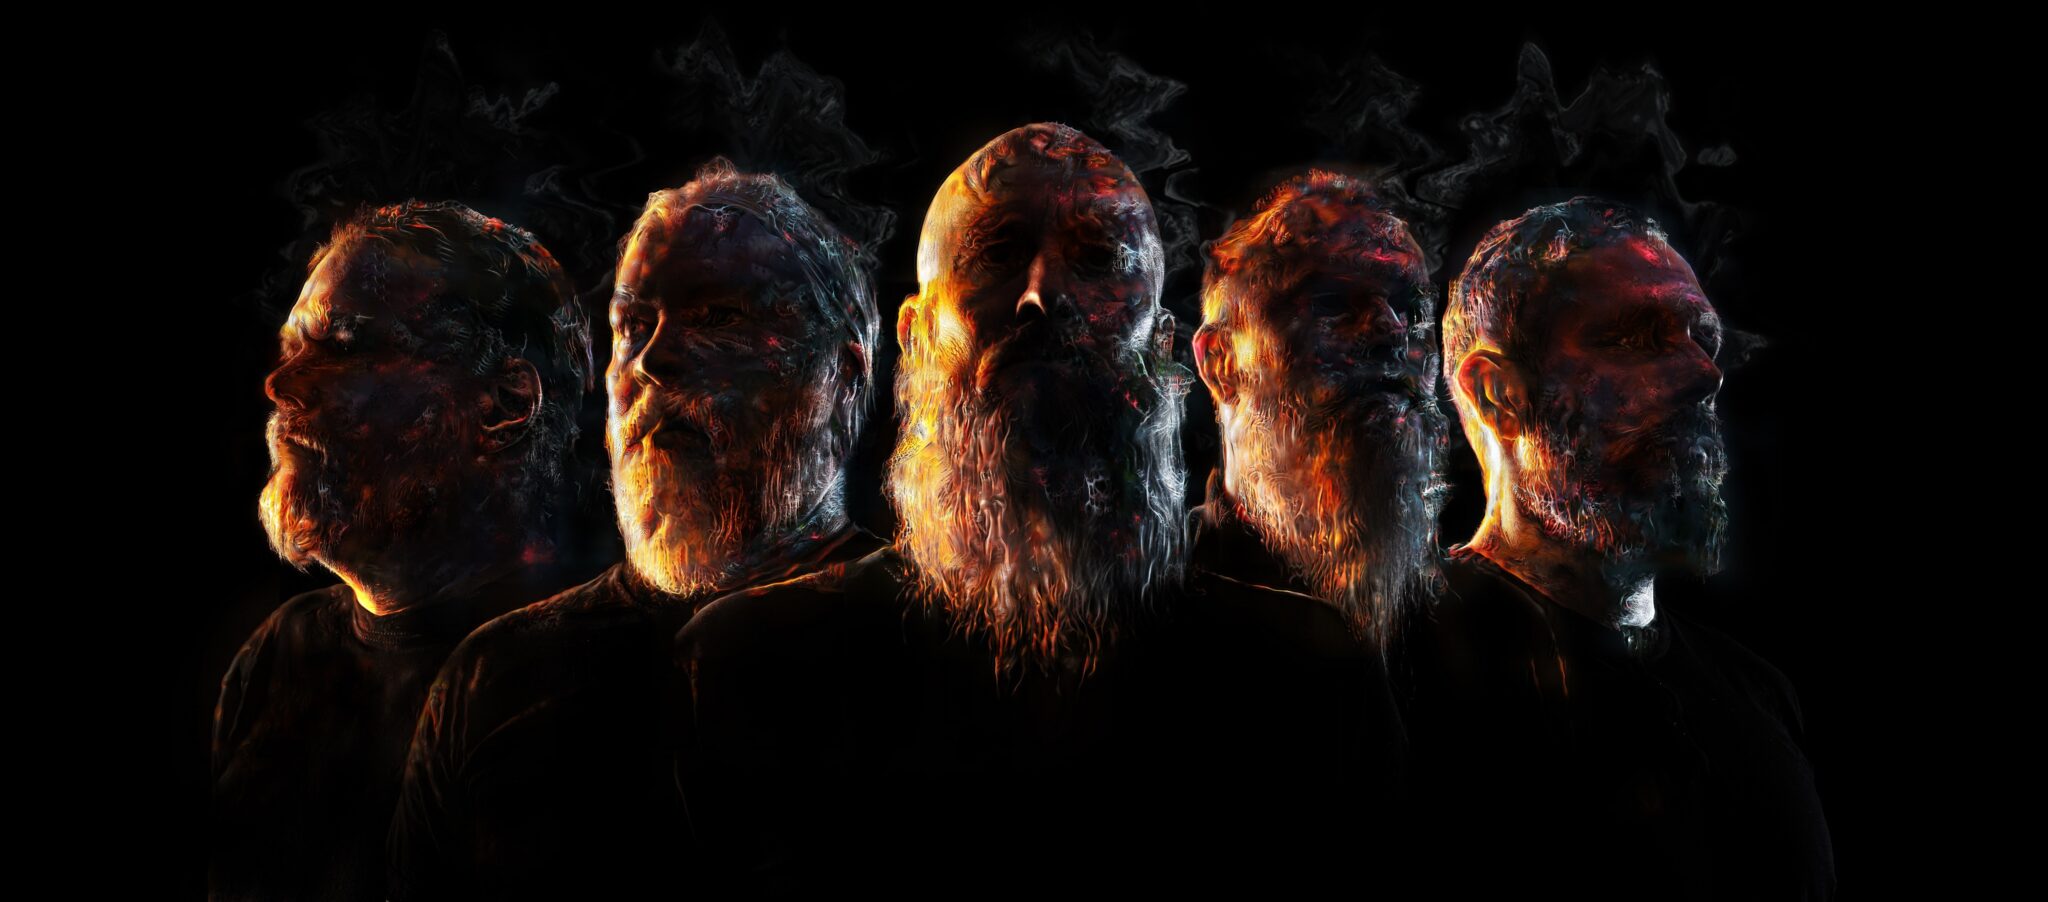 Read more about the article MESHUGGAH release official visualizer for “They Move Below”.